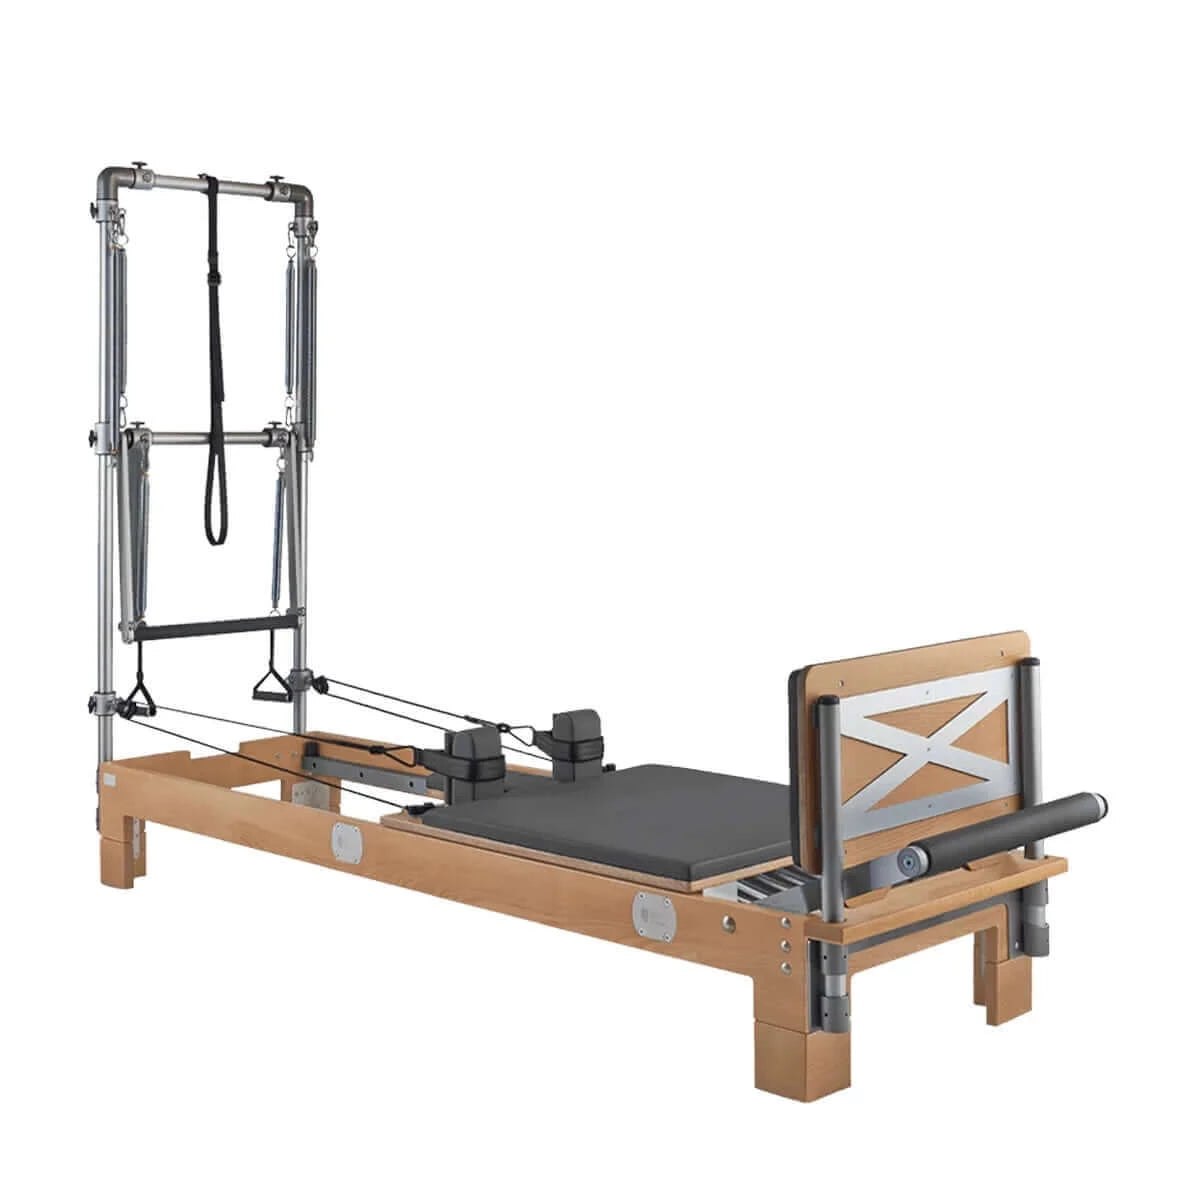 Anthacite Grey BASI Systems Pilates Jump Board by BASI Systems sold by Pilates Matters® by BSP LLC